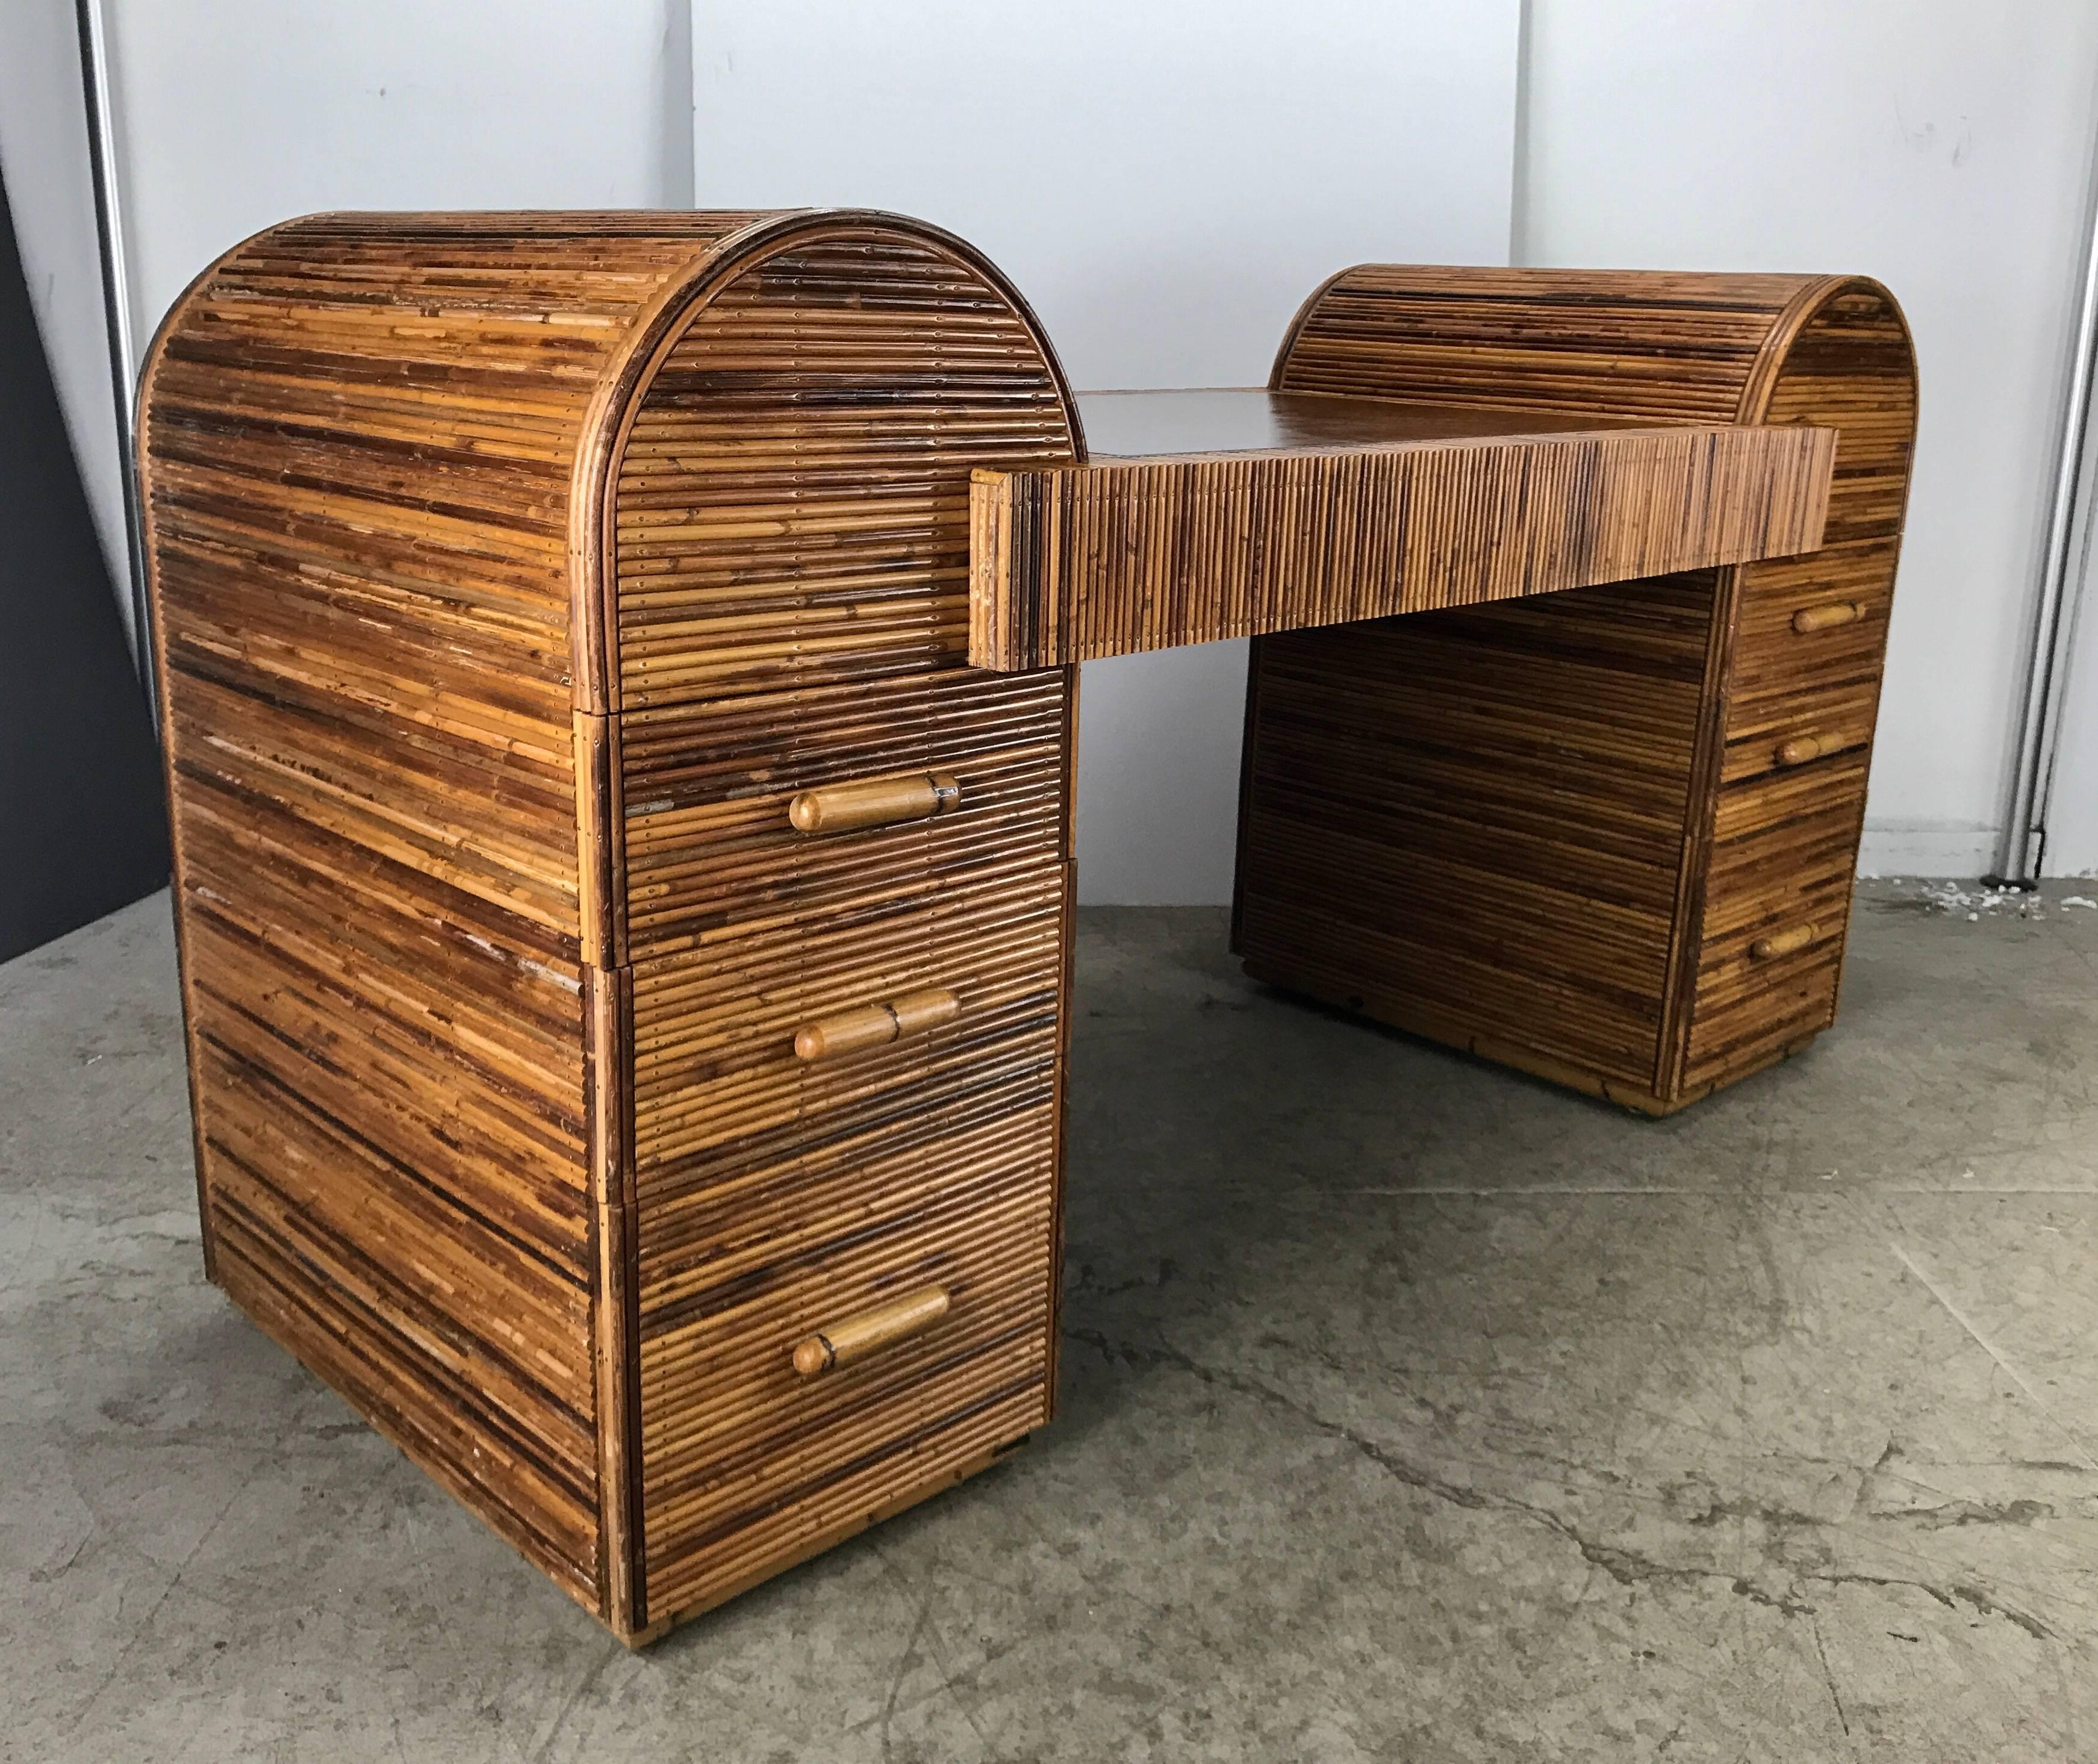 Unusual Art Deco split reed / stick wicker desk with compelling architectural lines and dramatic presence.

Two end pieces with three drawers each, rise above center work area with arched perfection and amplify the Art Deco design.

Stunning